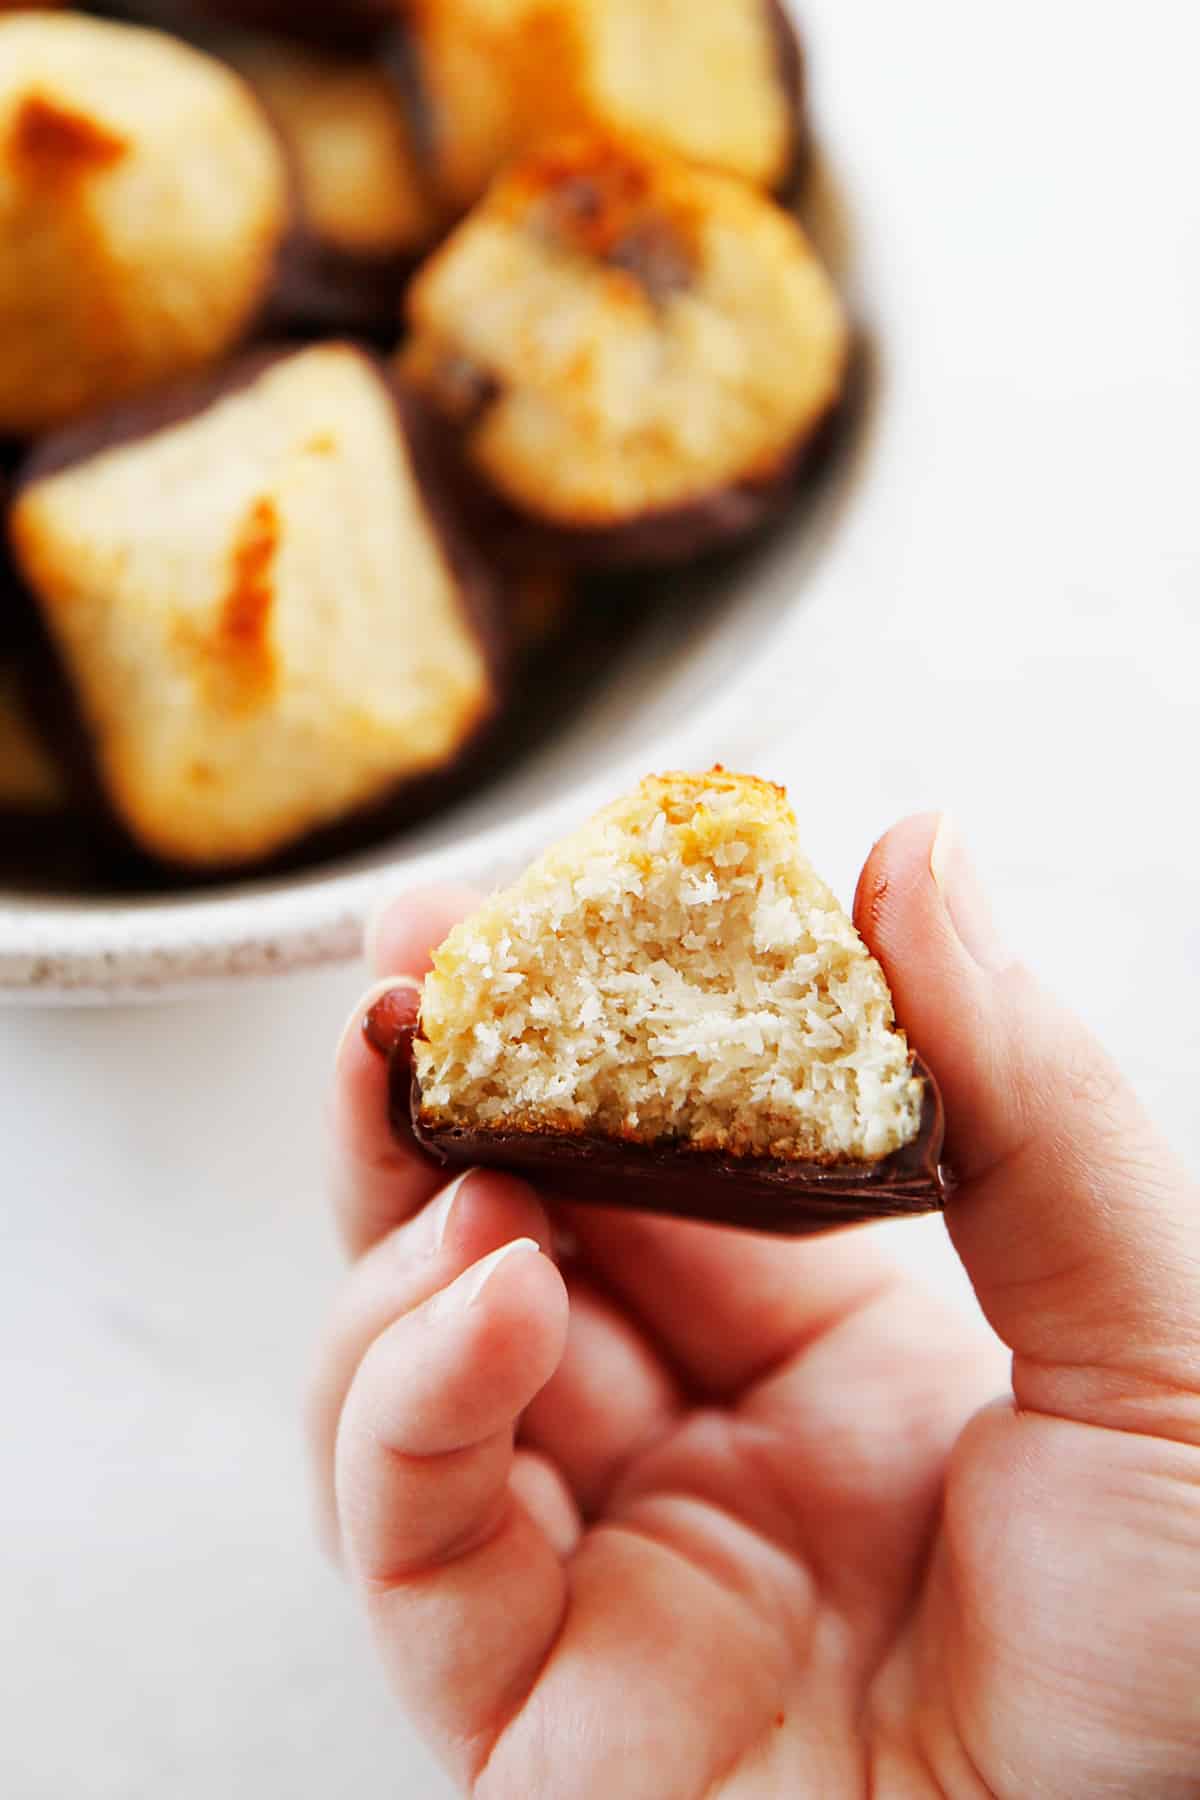 A bite of a healthy coconut macaroon dipped in chocolate.